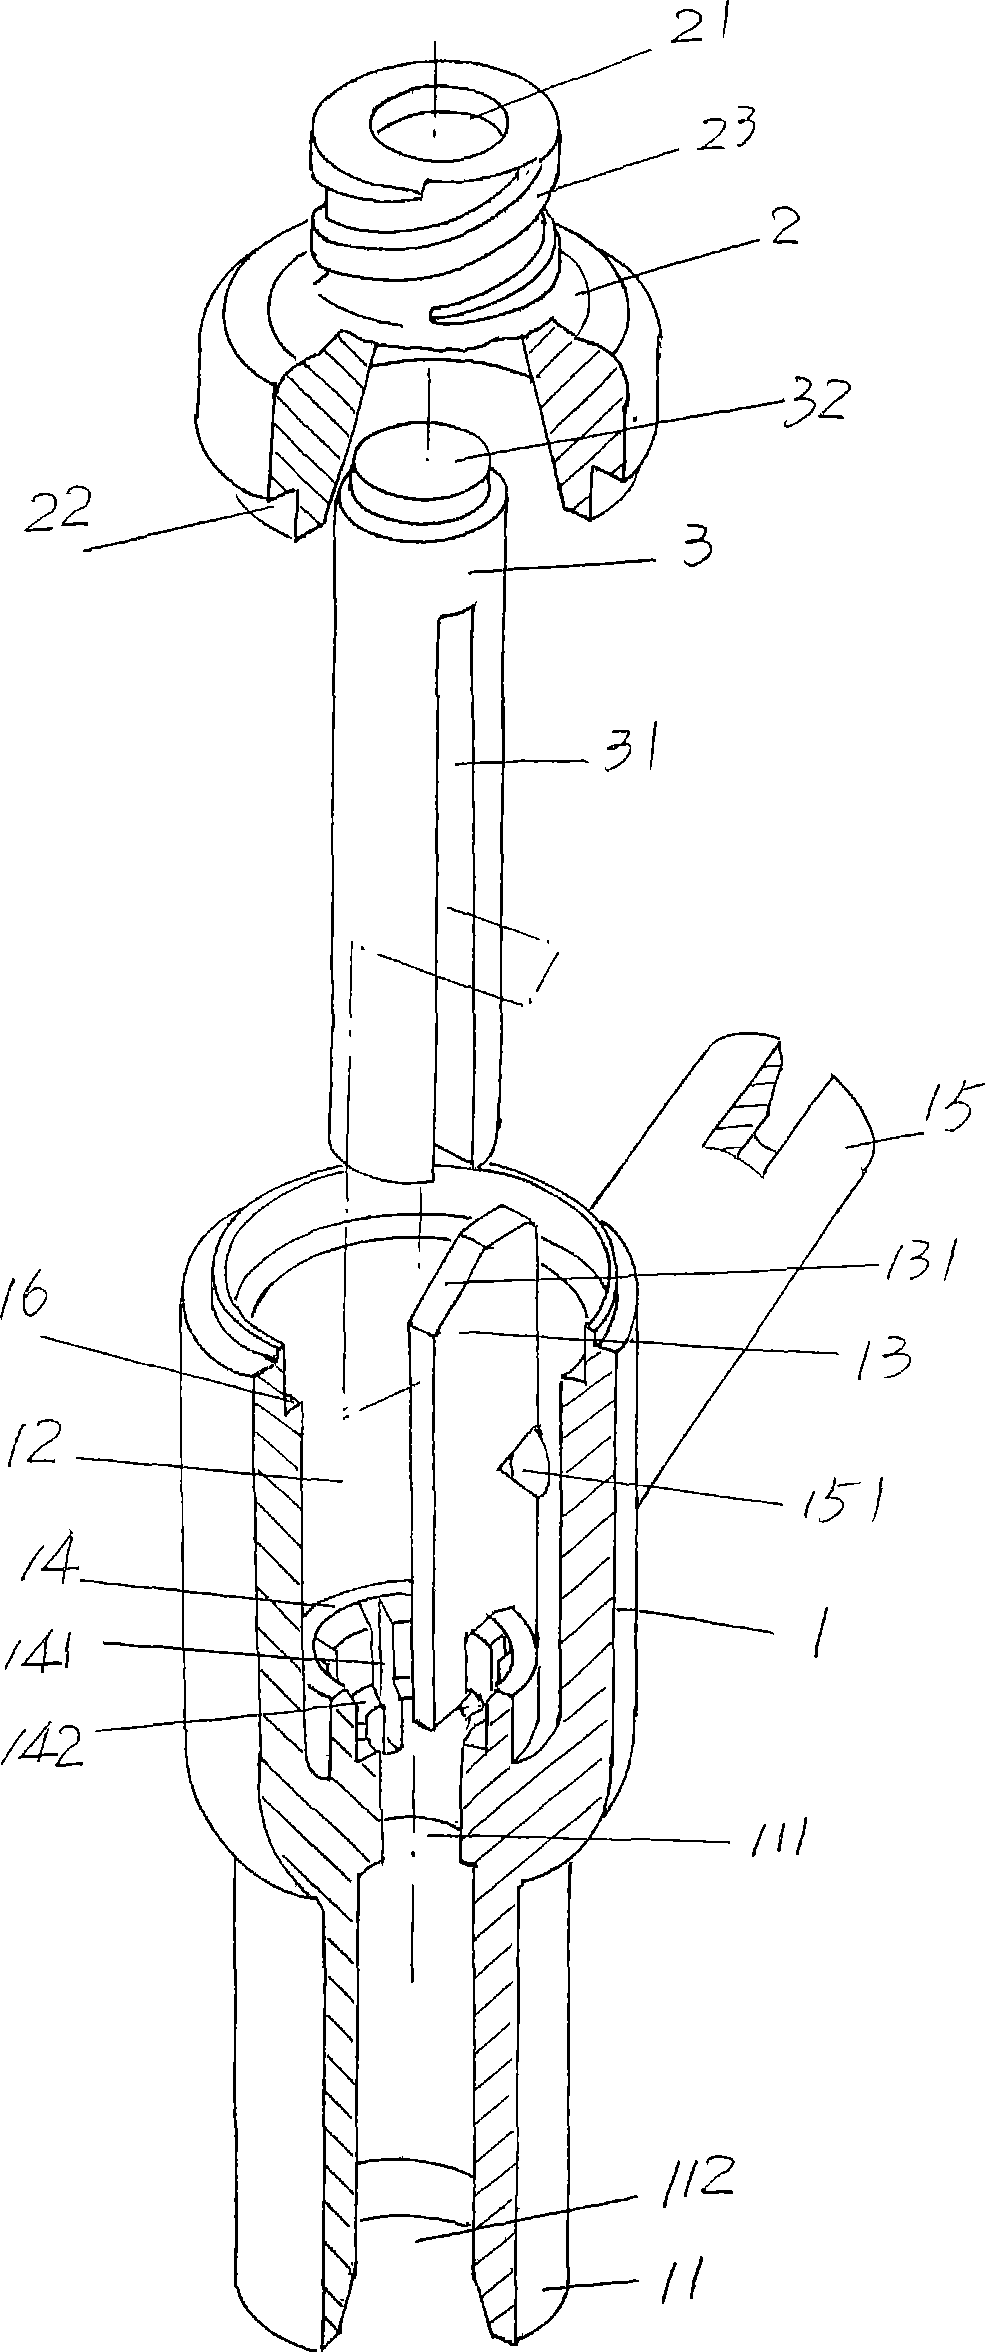 Connector for sampling and adding medicine without needle